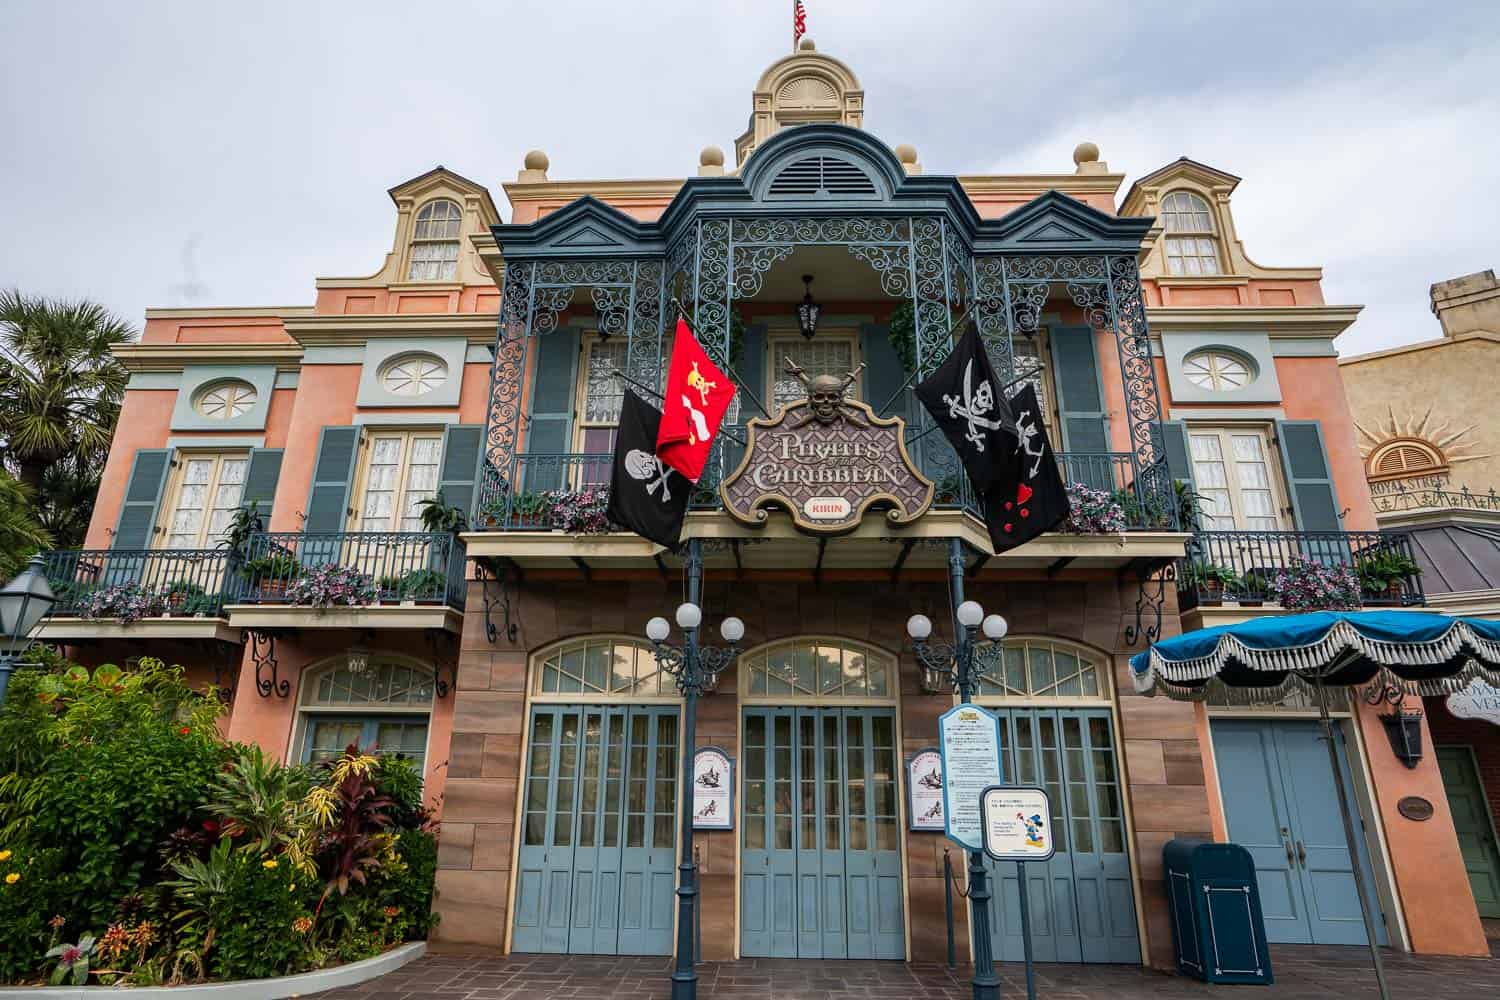 Entrance to the Pirates of the Caribbean ride at Tokyo Disneyland